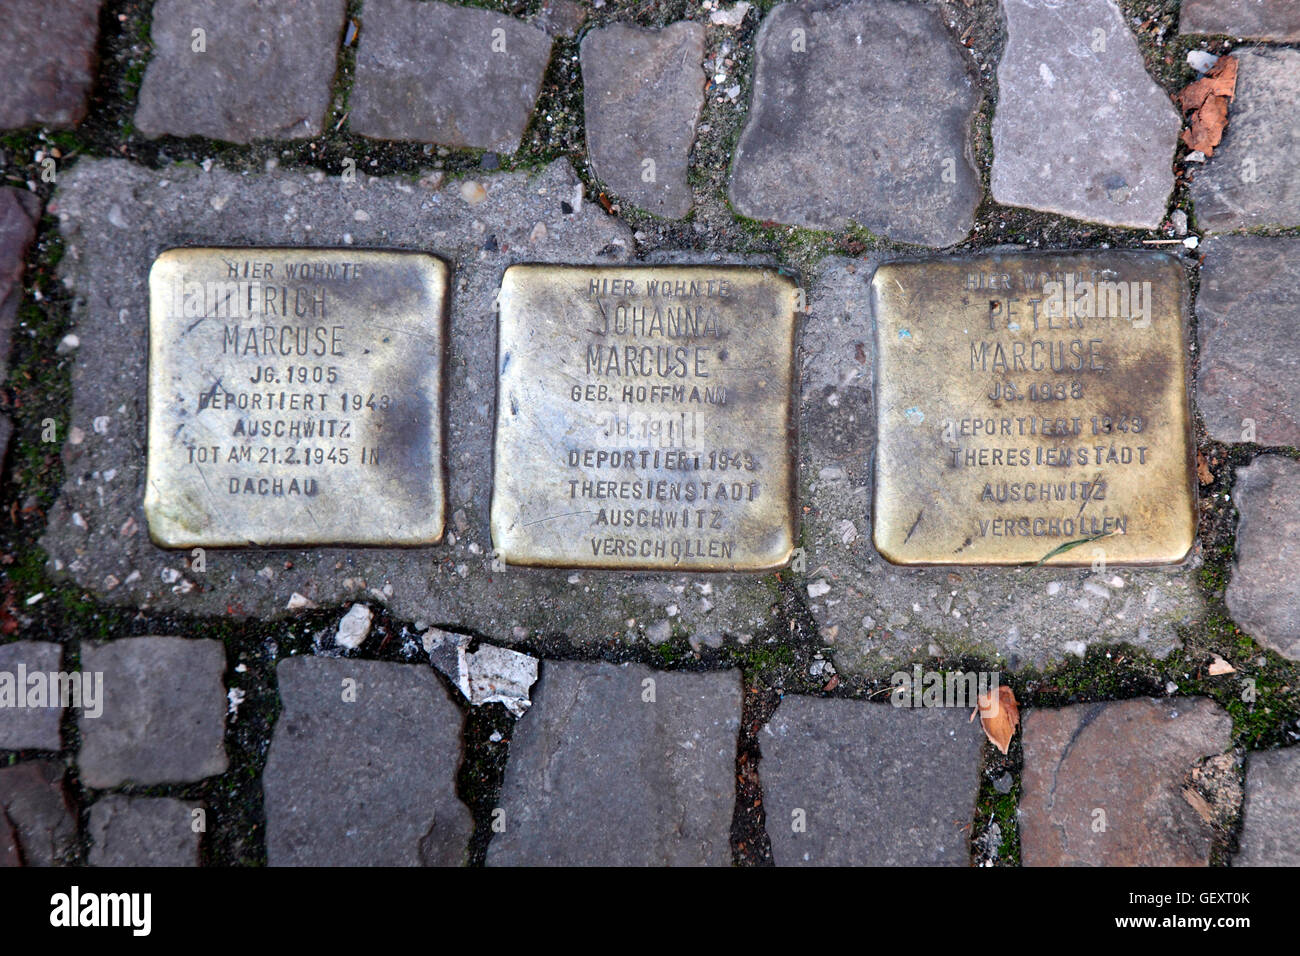 Three of many brass memorials set in the pavement in Hackescher in Berlin to commemorate Jewish Holocaust victims. Stock Photo